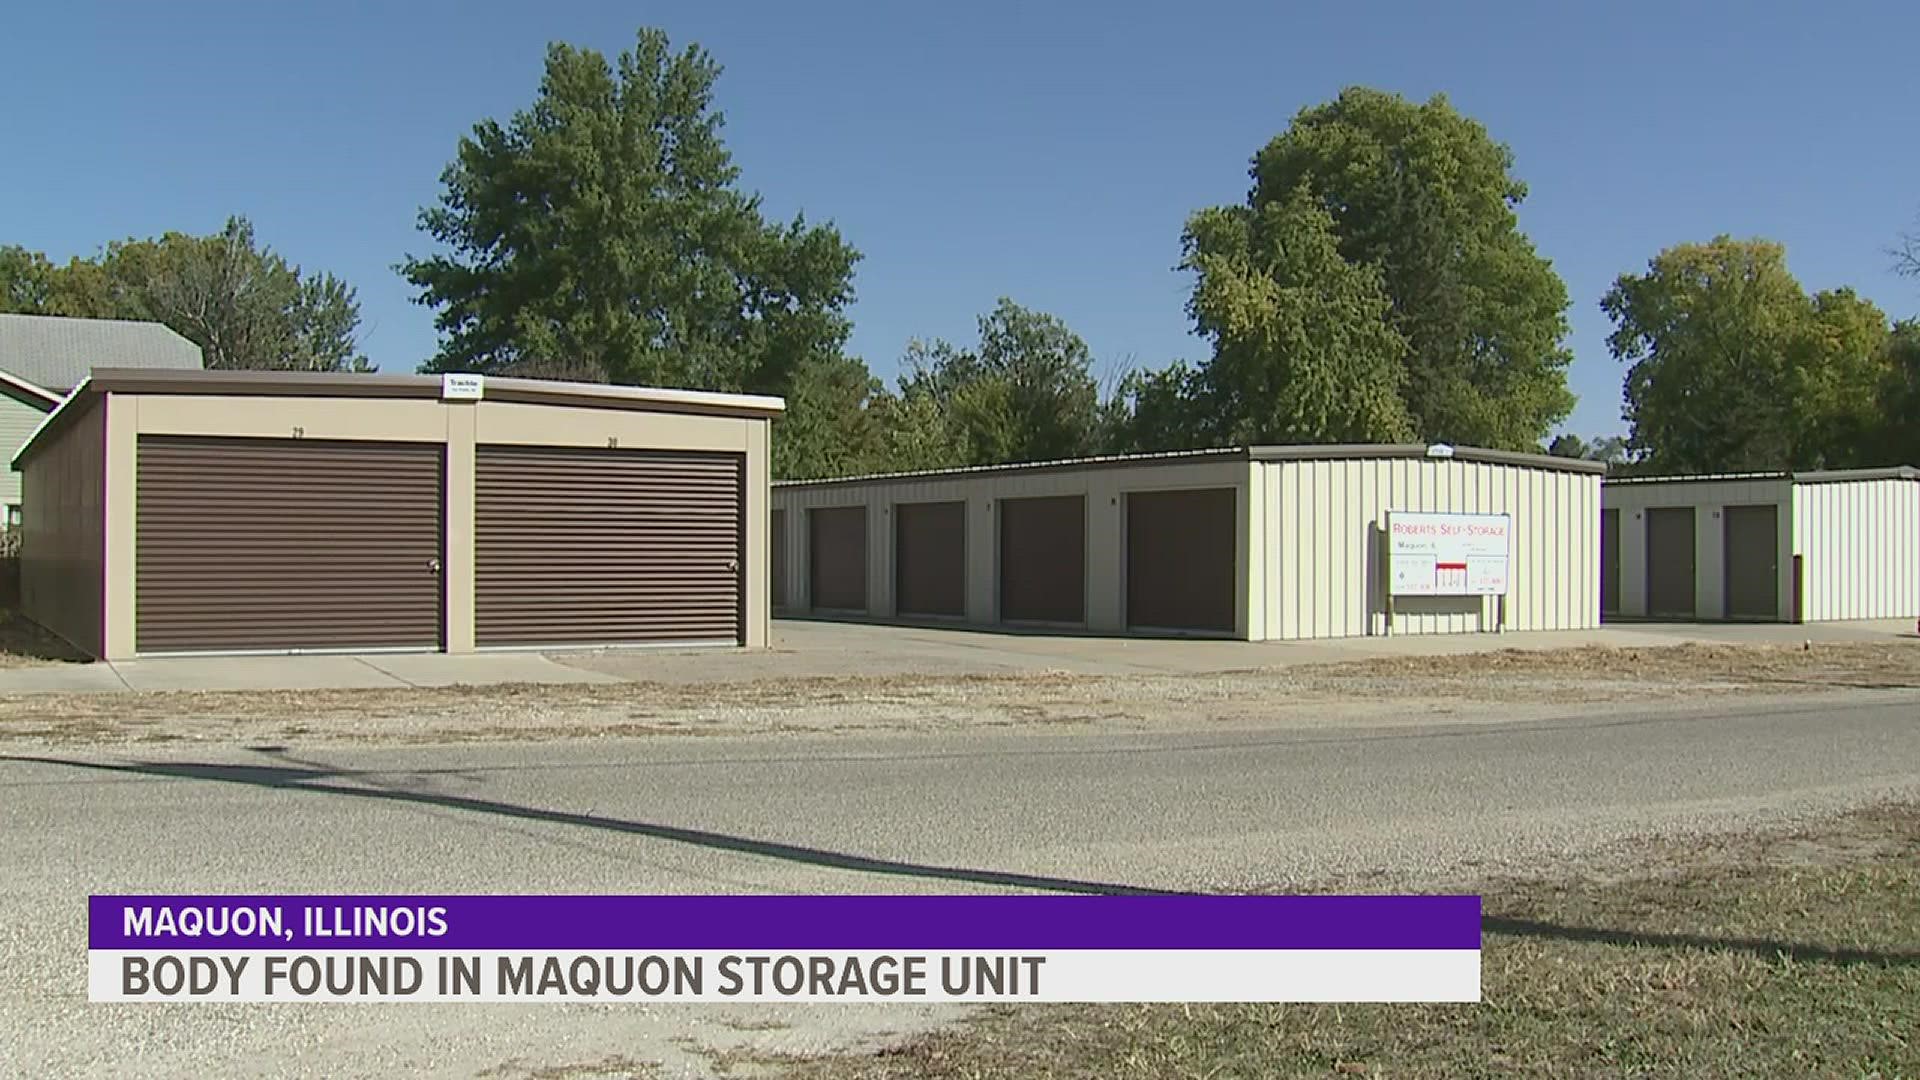 Autopsy conducted for the human remains found in a Maquon storage unit.